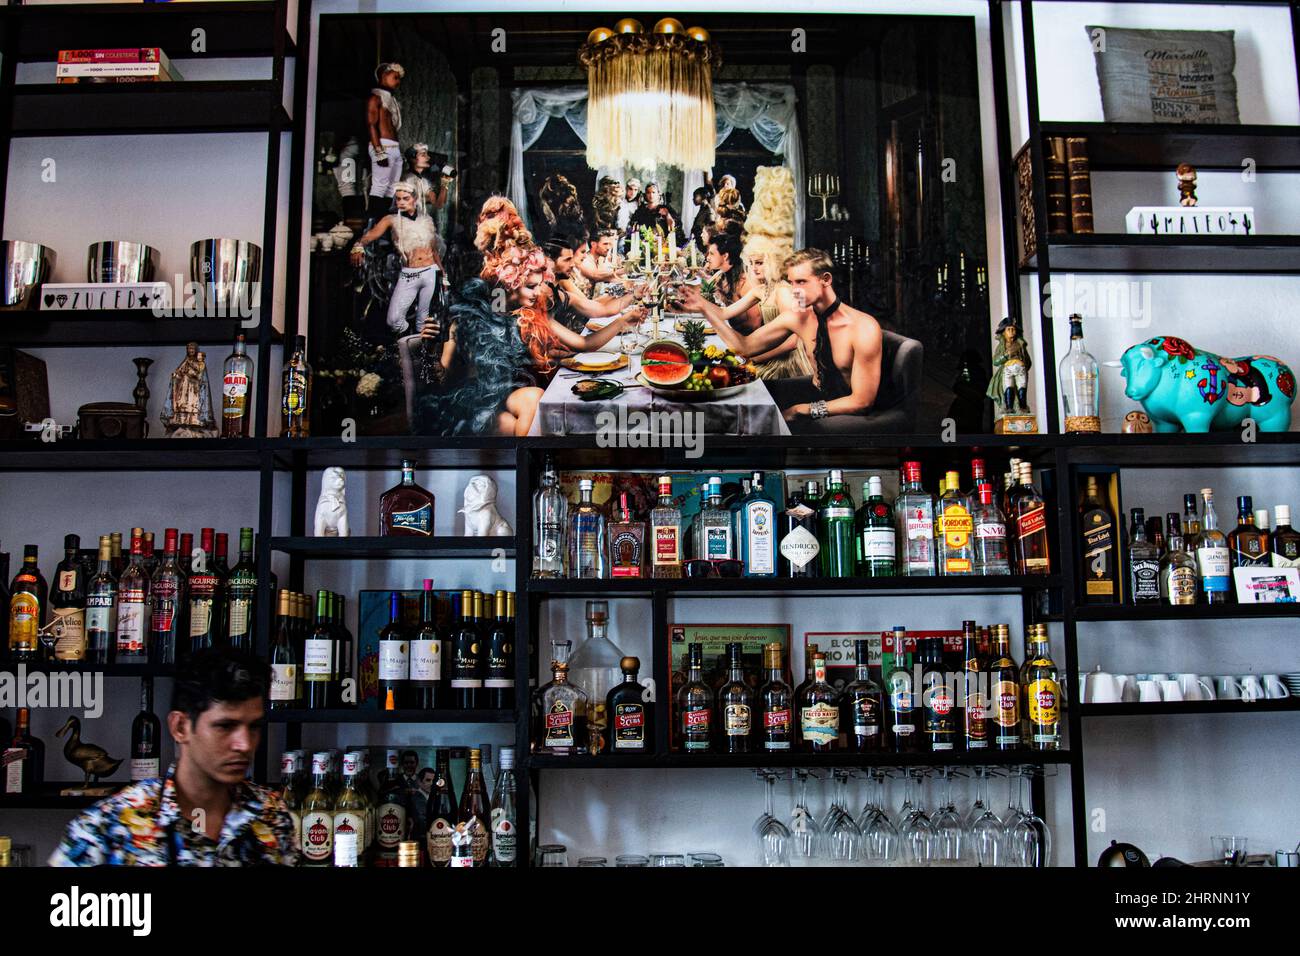 Inside a fancy Cuban restaurant and bar where the bartender is making drinks with alcoholic beverages on display and beautiful mural Cuban artwork. Stock Photo